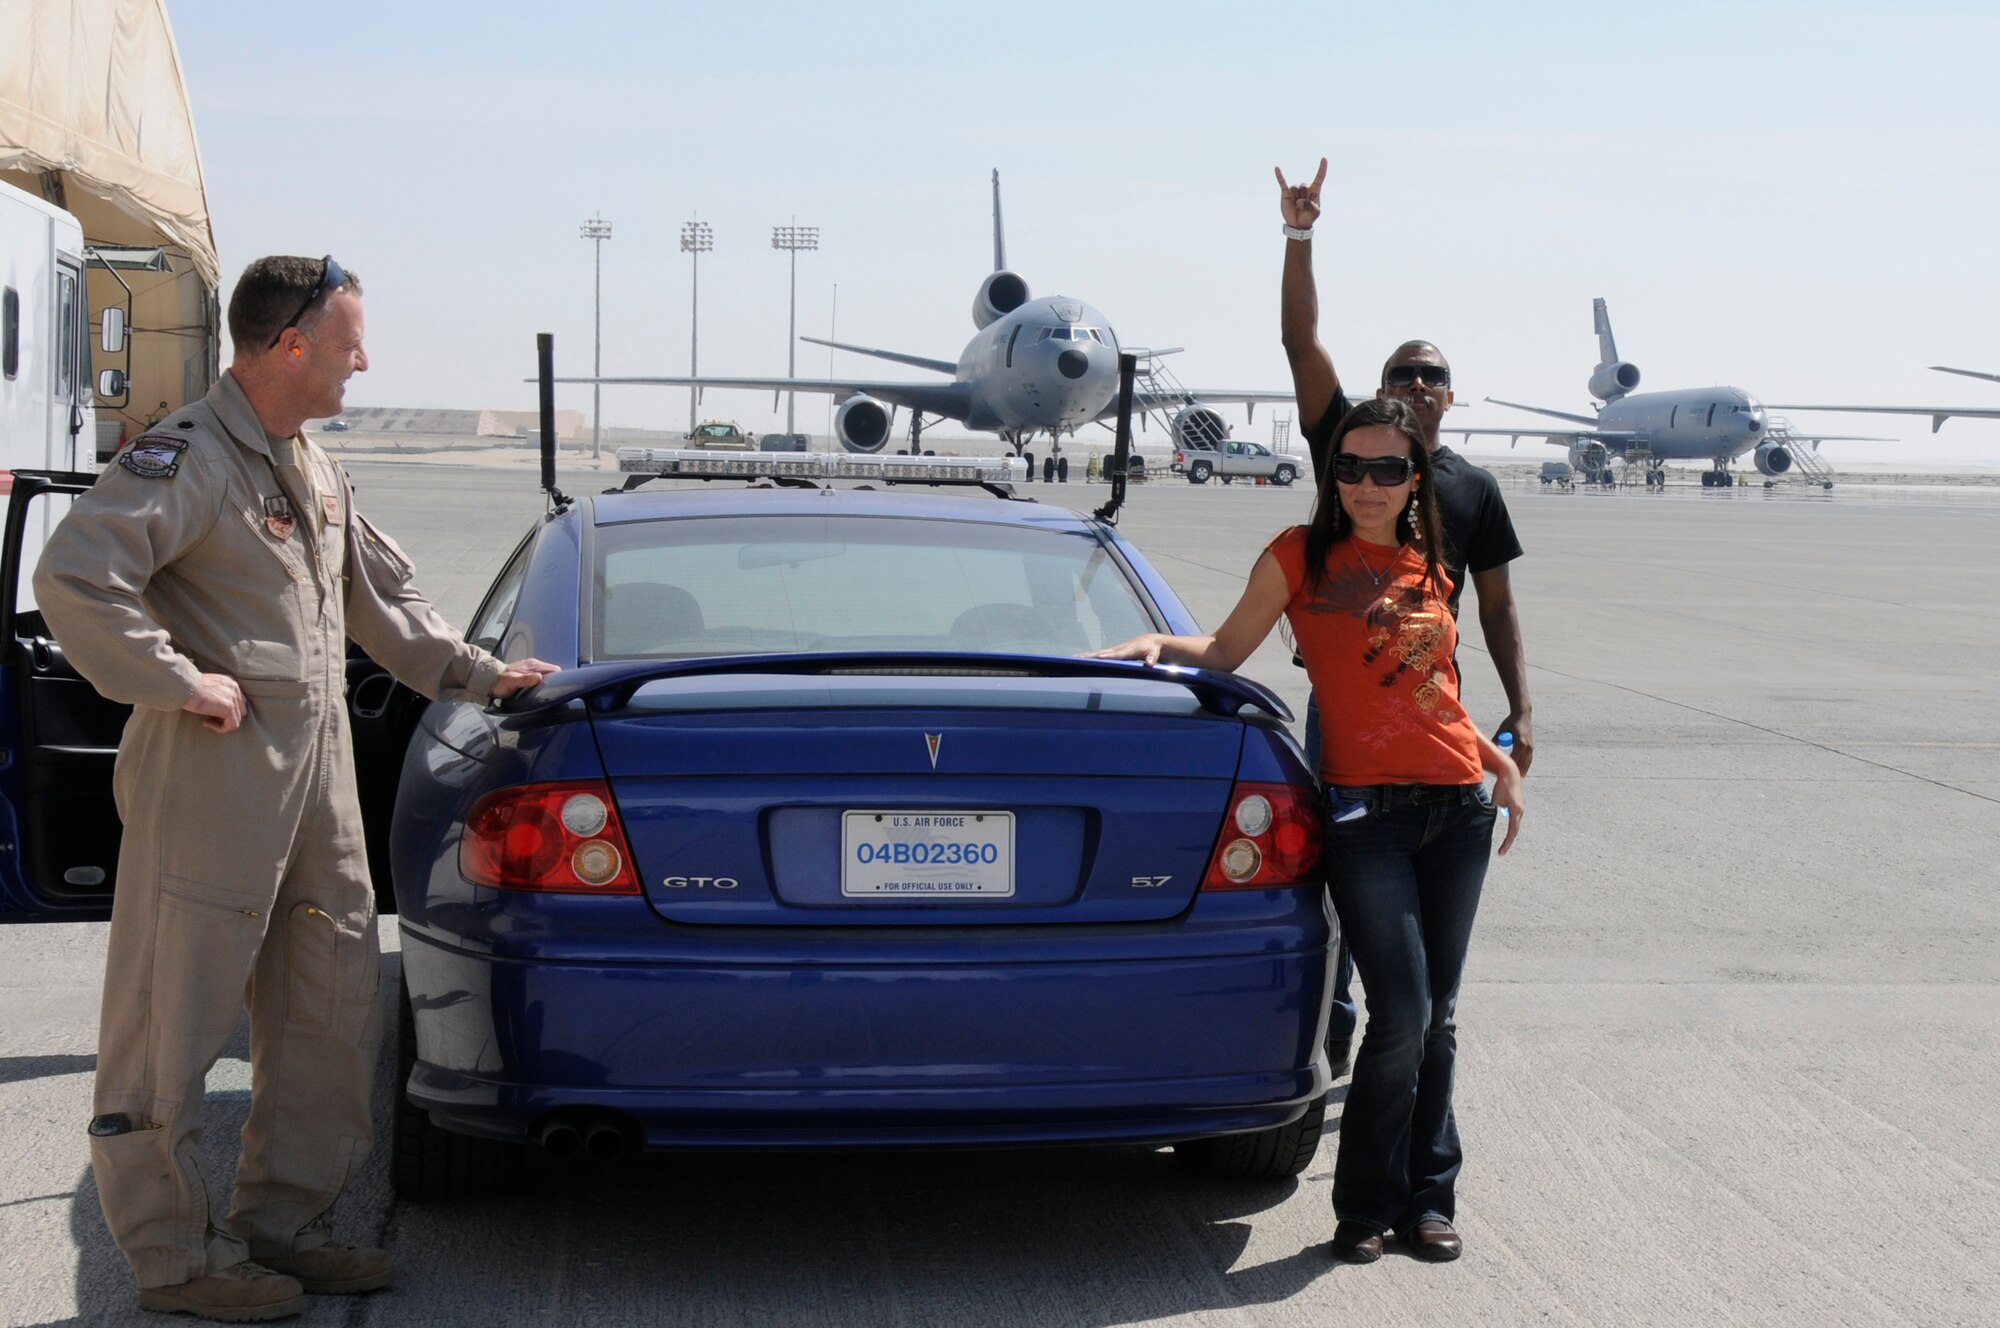 SOUTHWEST ASIA - Anita Benner, lead singer and Zeale, emcee of Los Bad Apples stop to pose for a photo before a ride in the chase car during a U-2 Dragonlady take-off at the 380th Air Expeditionary Wing, Feb 10. The band were able to get an up close tour of the aircraft and interact with Airmaen of the 380th. Los Bad Apples are a latin inspired hip-hop band on their second stop of an Armed Forces Entertainment tour. (U.S. Air Force photo by Senior Airman Brian J. Ellis) (Released)